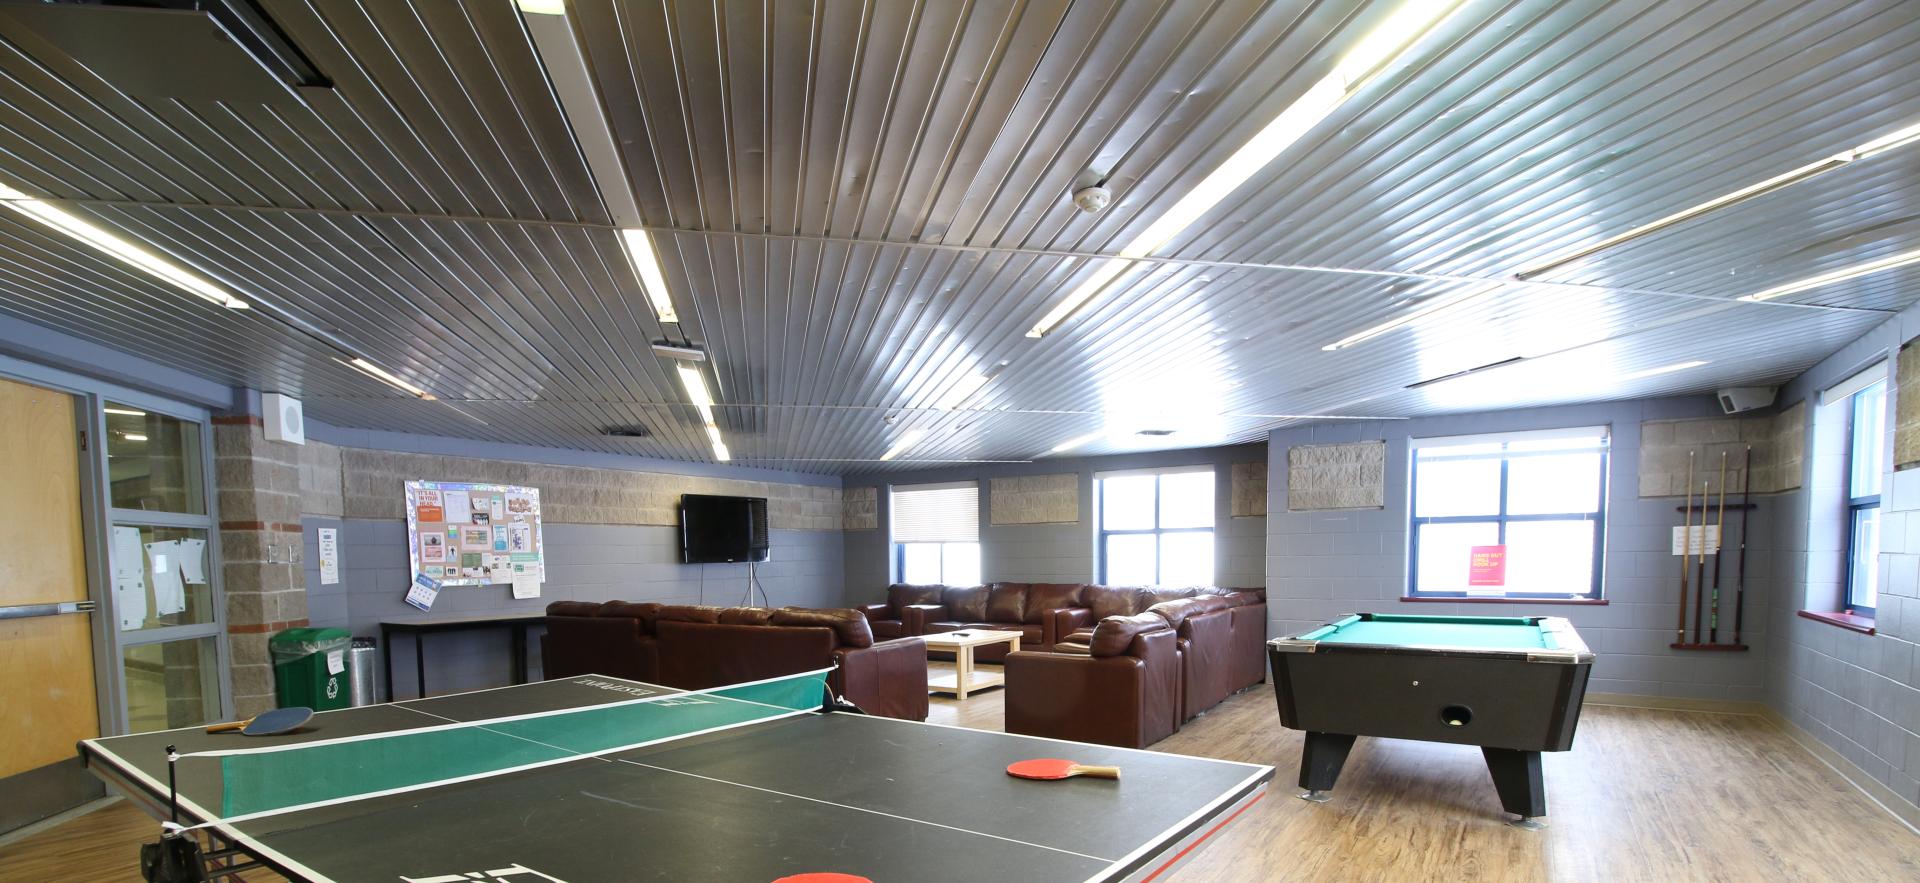 View of games room in ray lawson hall